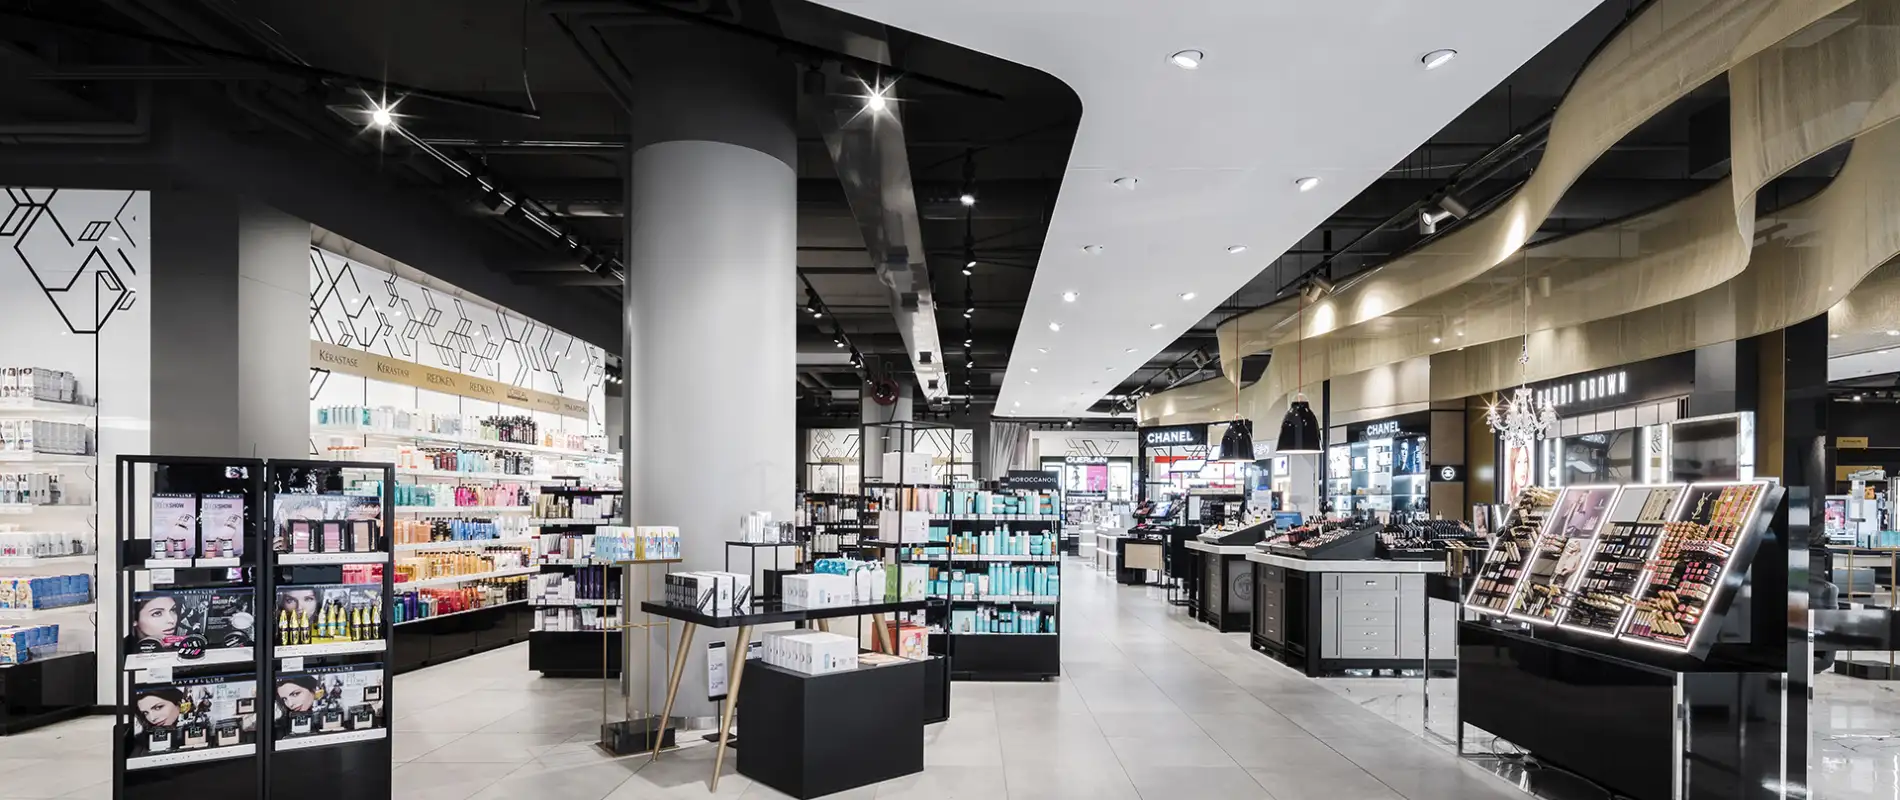 department store - new design - Stockmann Tapiola - beauty department - inside overview - entrance area